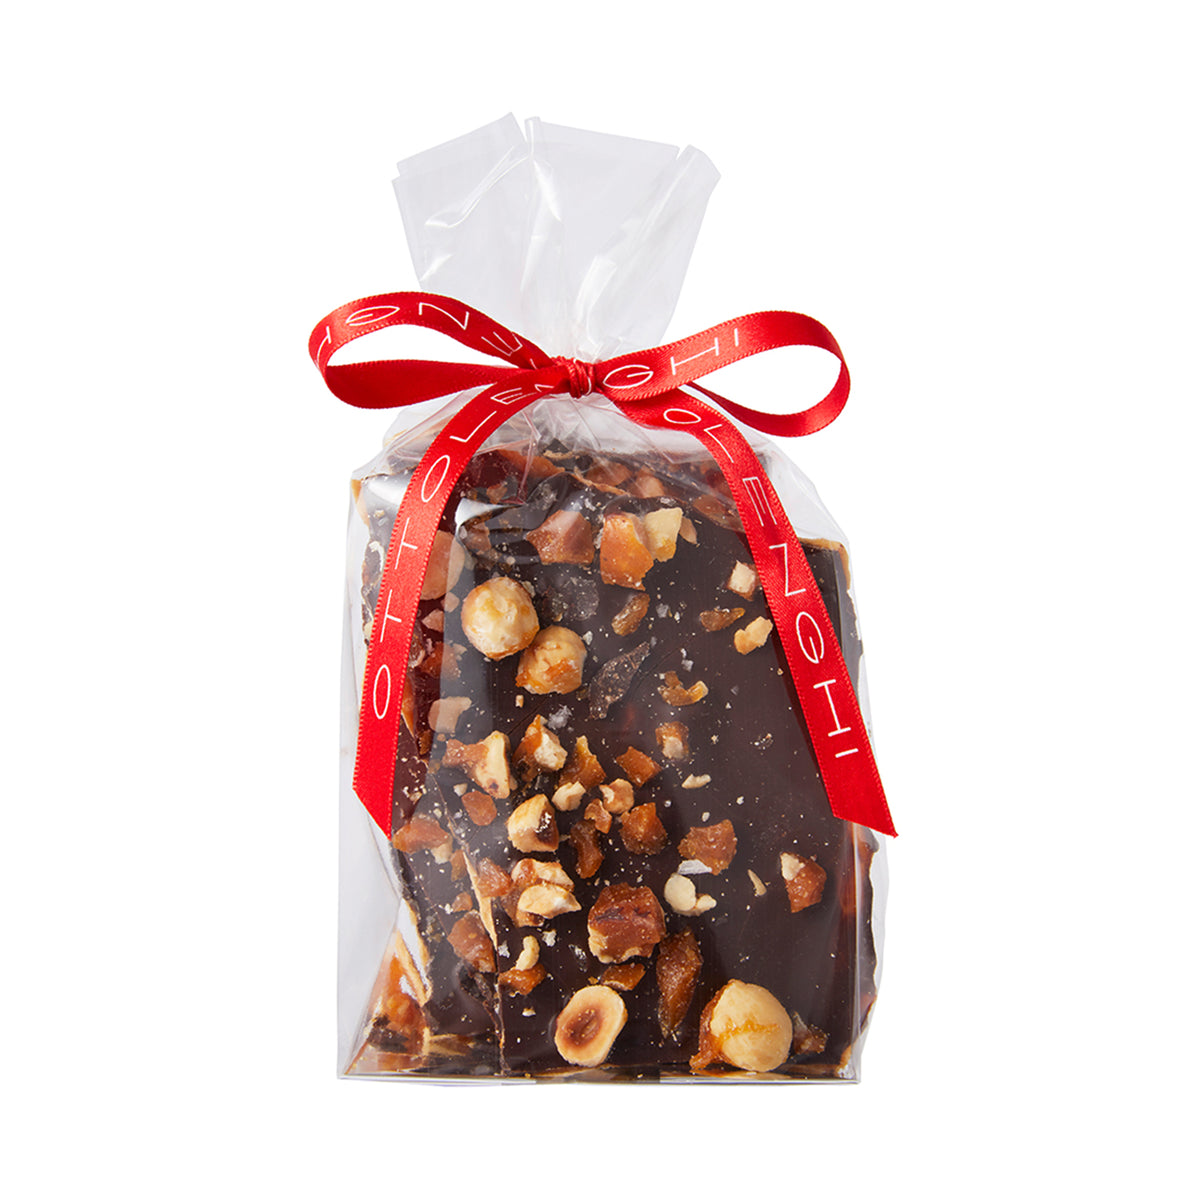 Salted Caramel and Chocolate Brittle